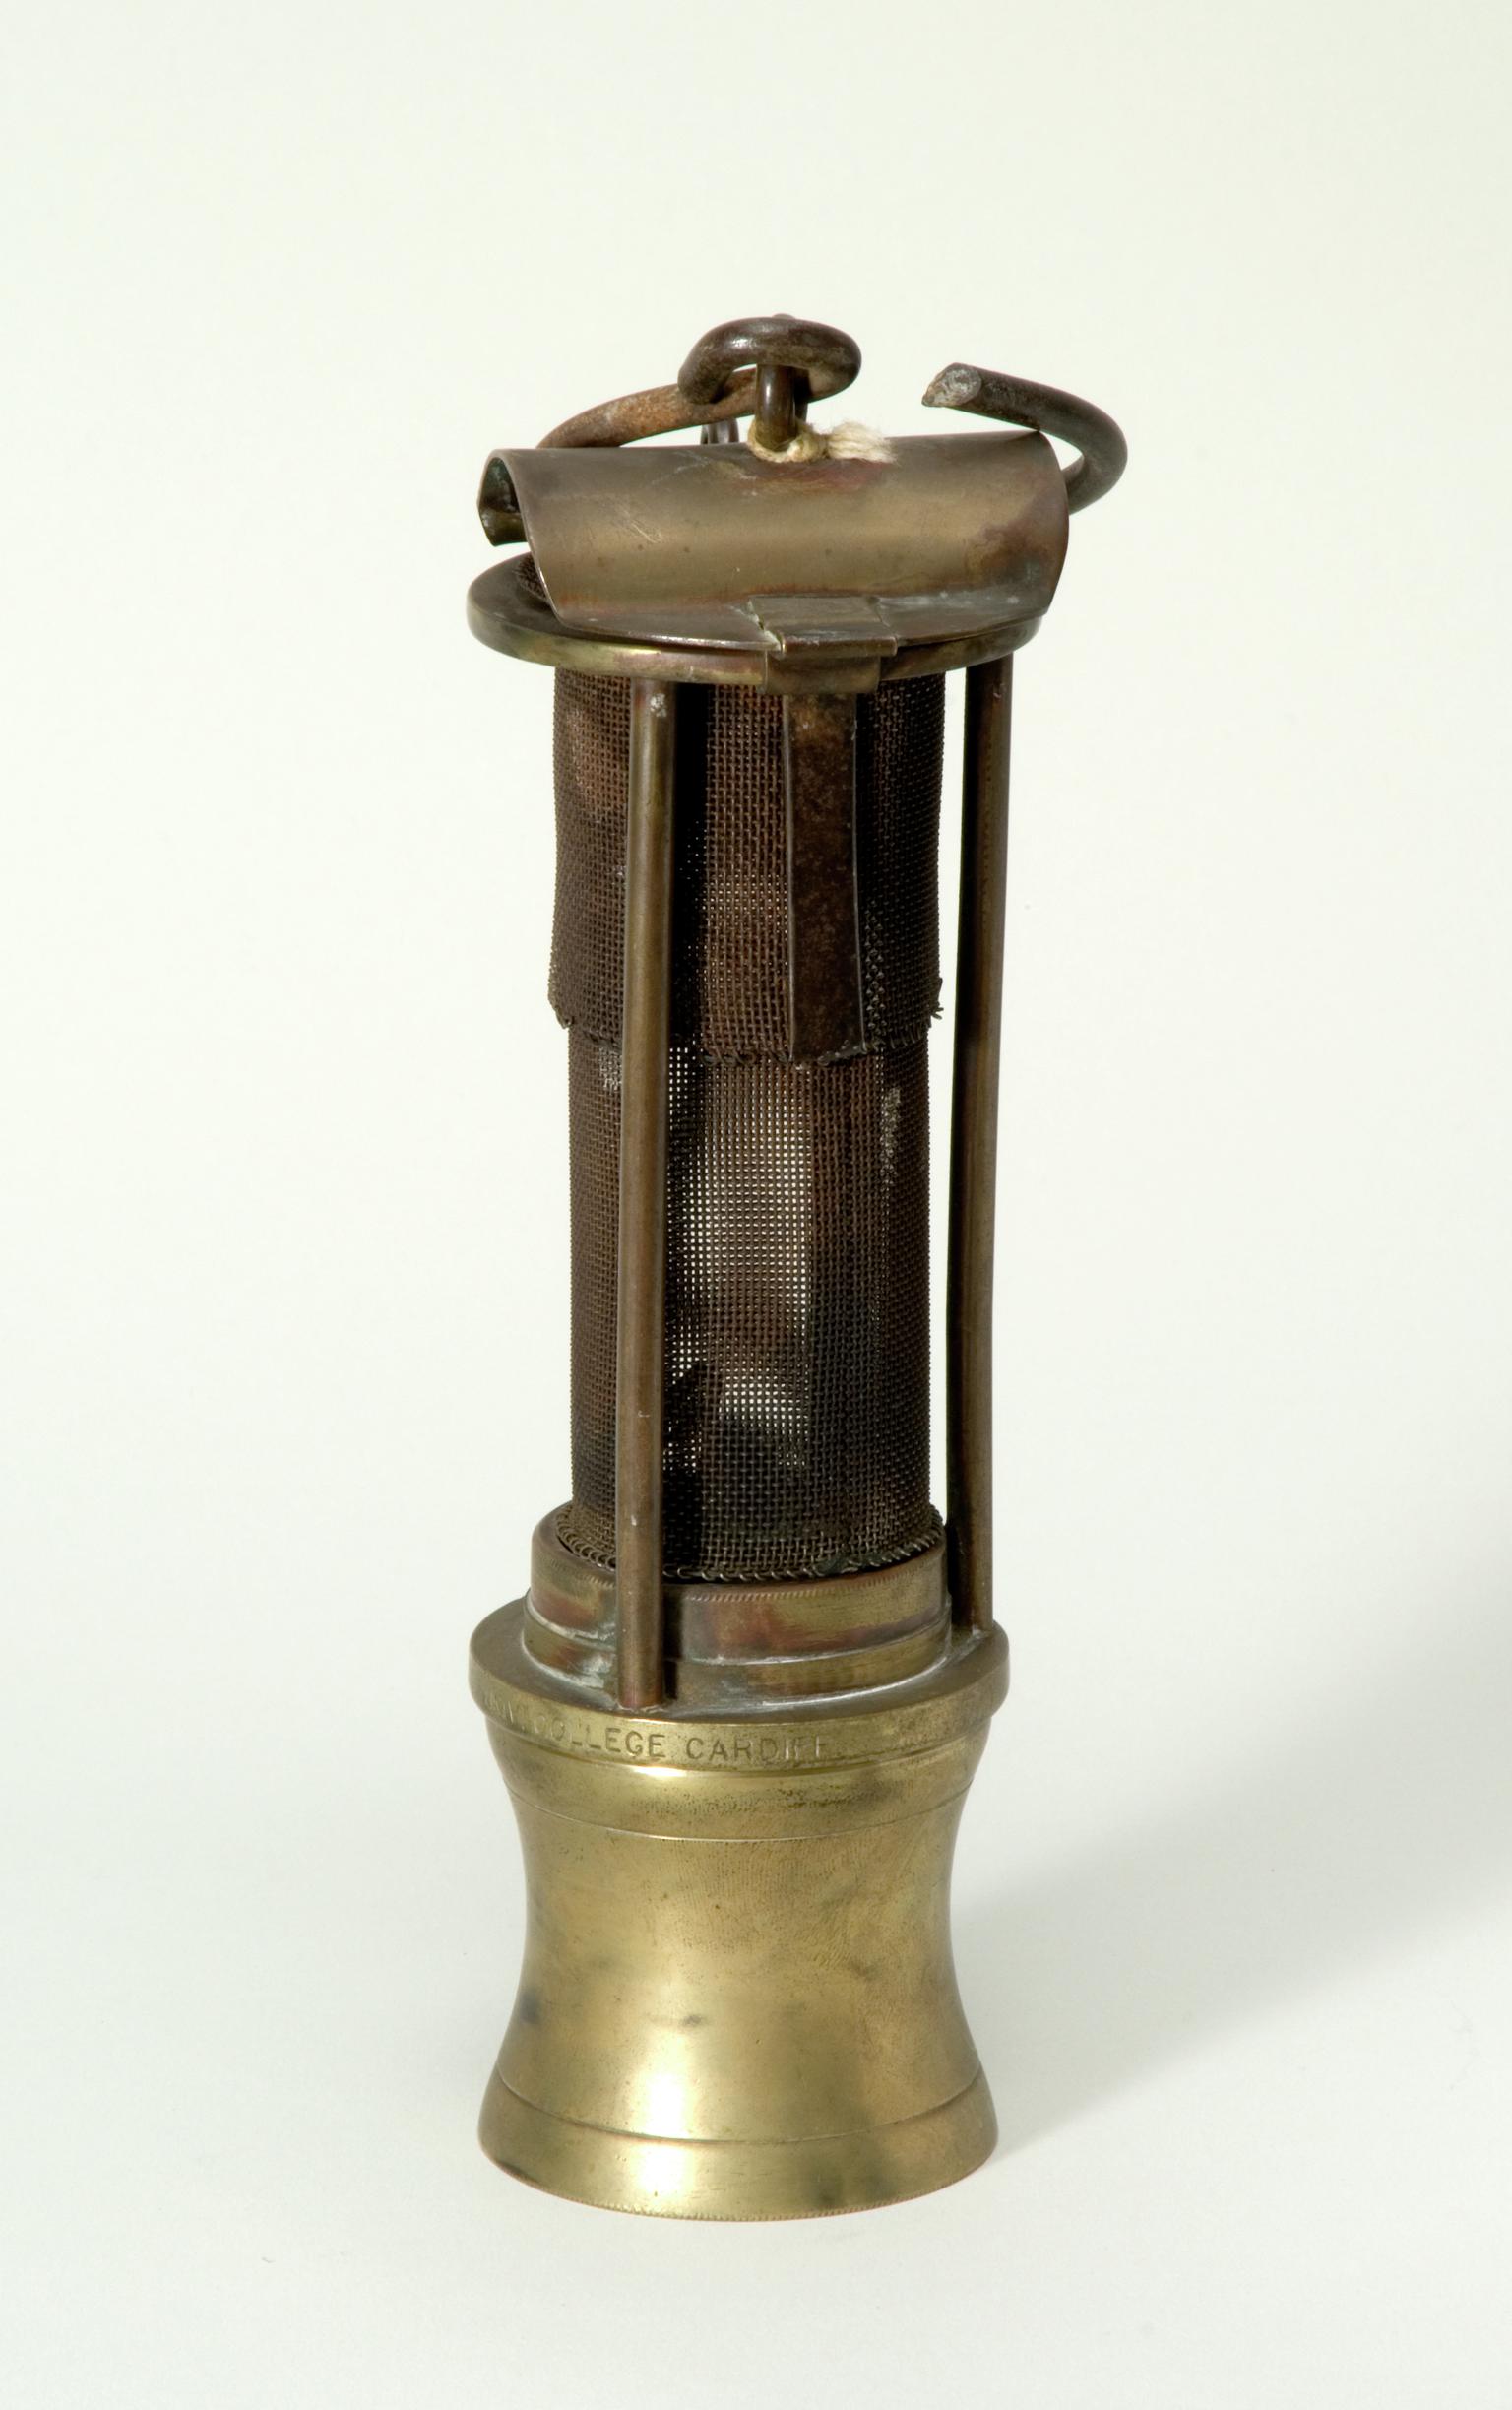 Davy flame safety lamp